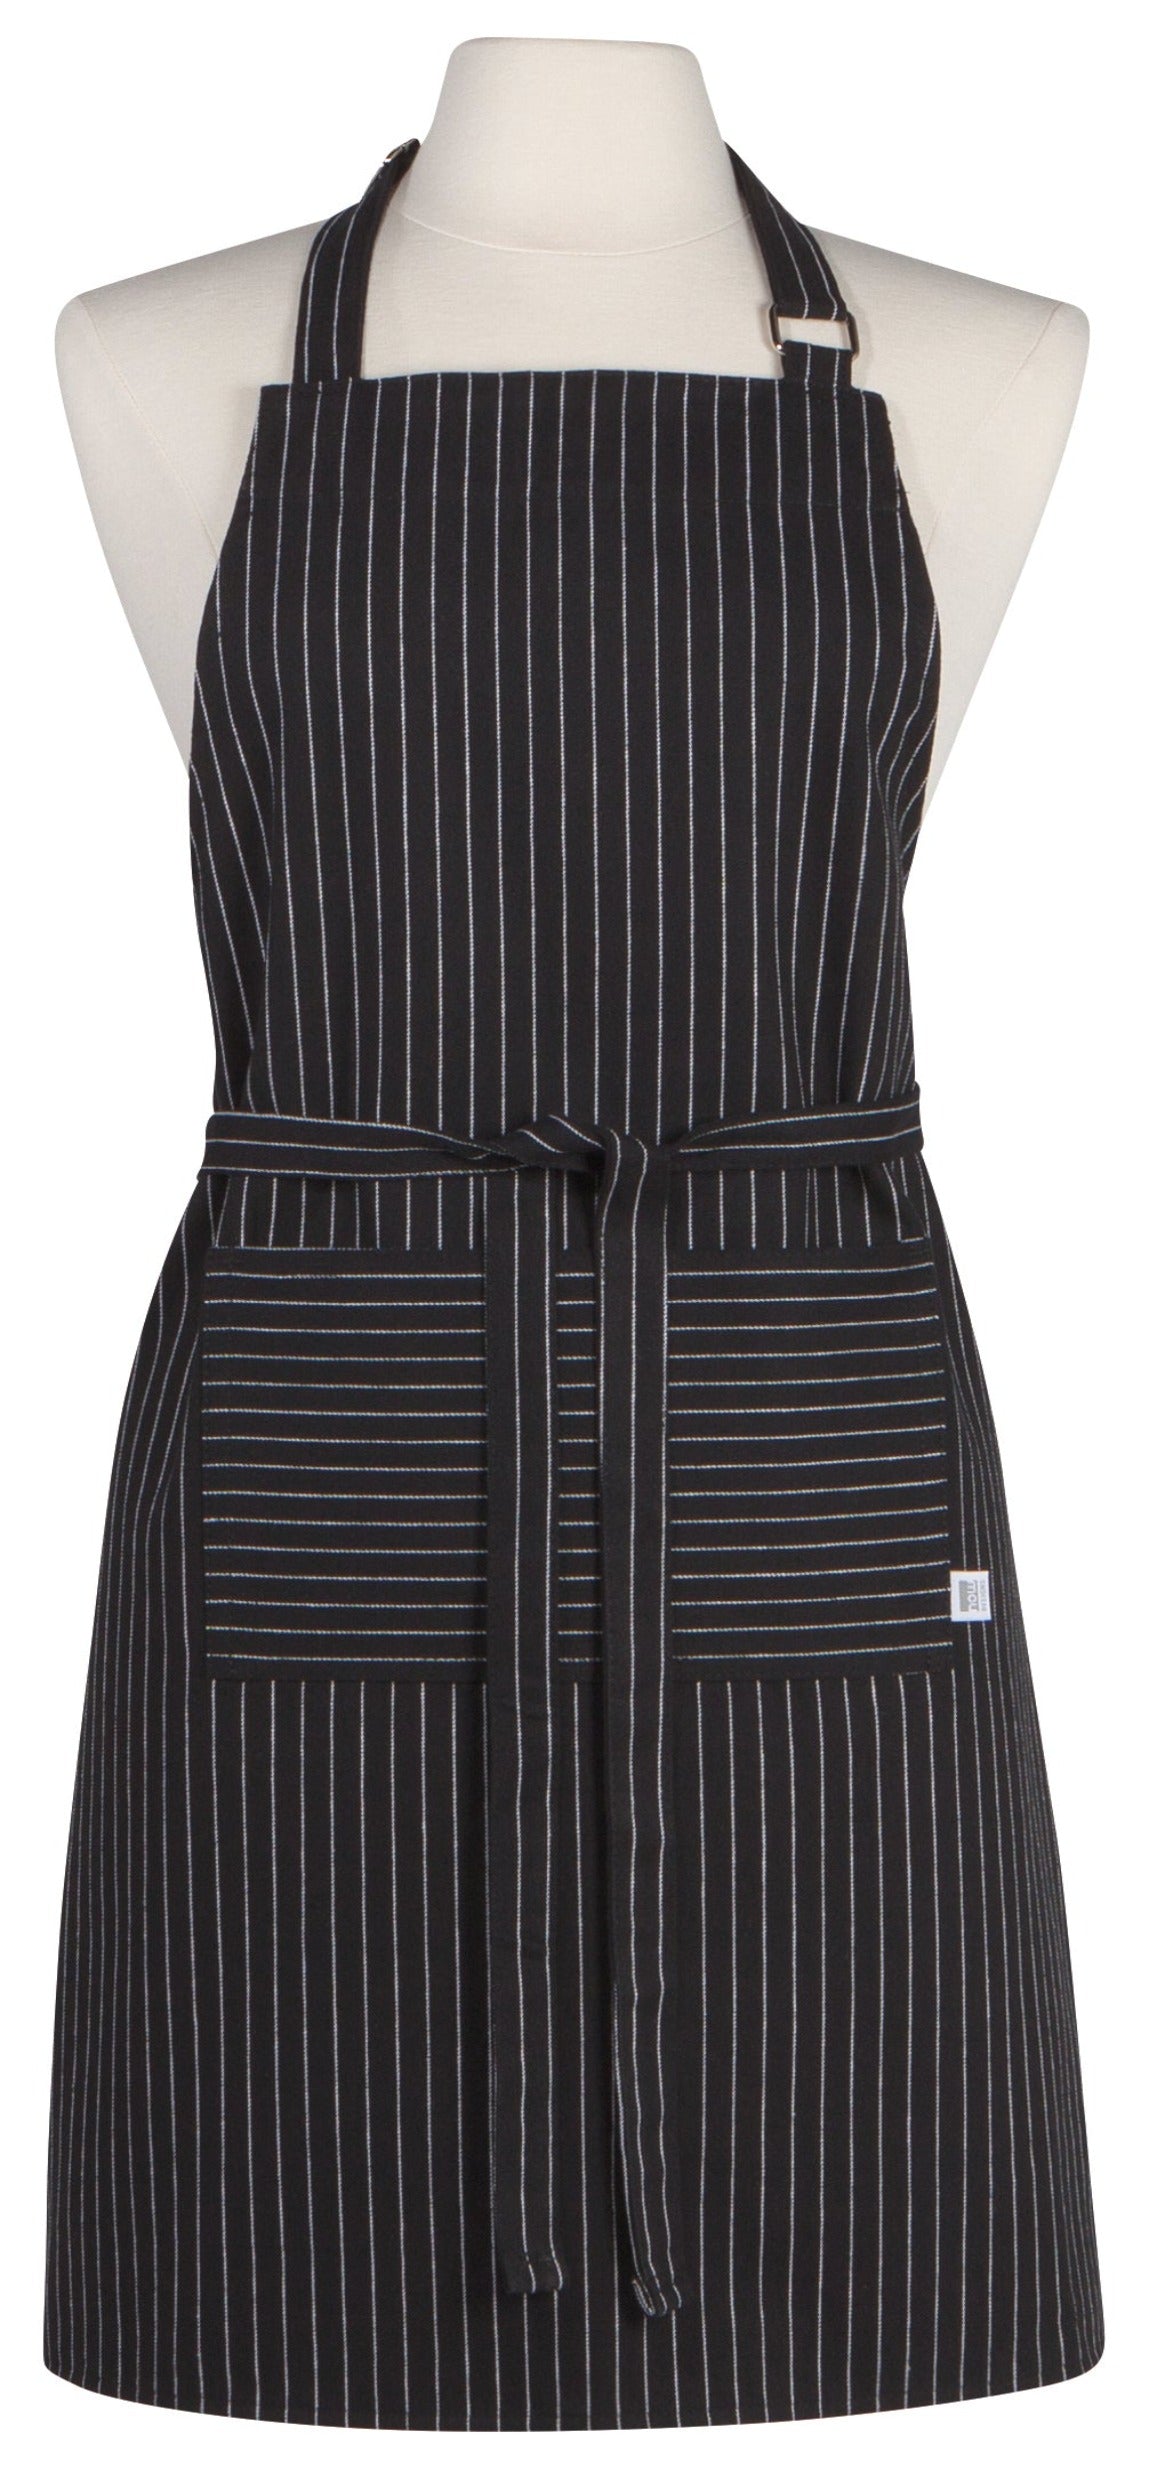 black apron with white pinstripes on a white mannequin